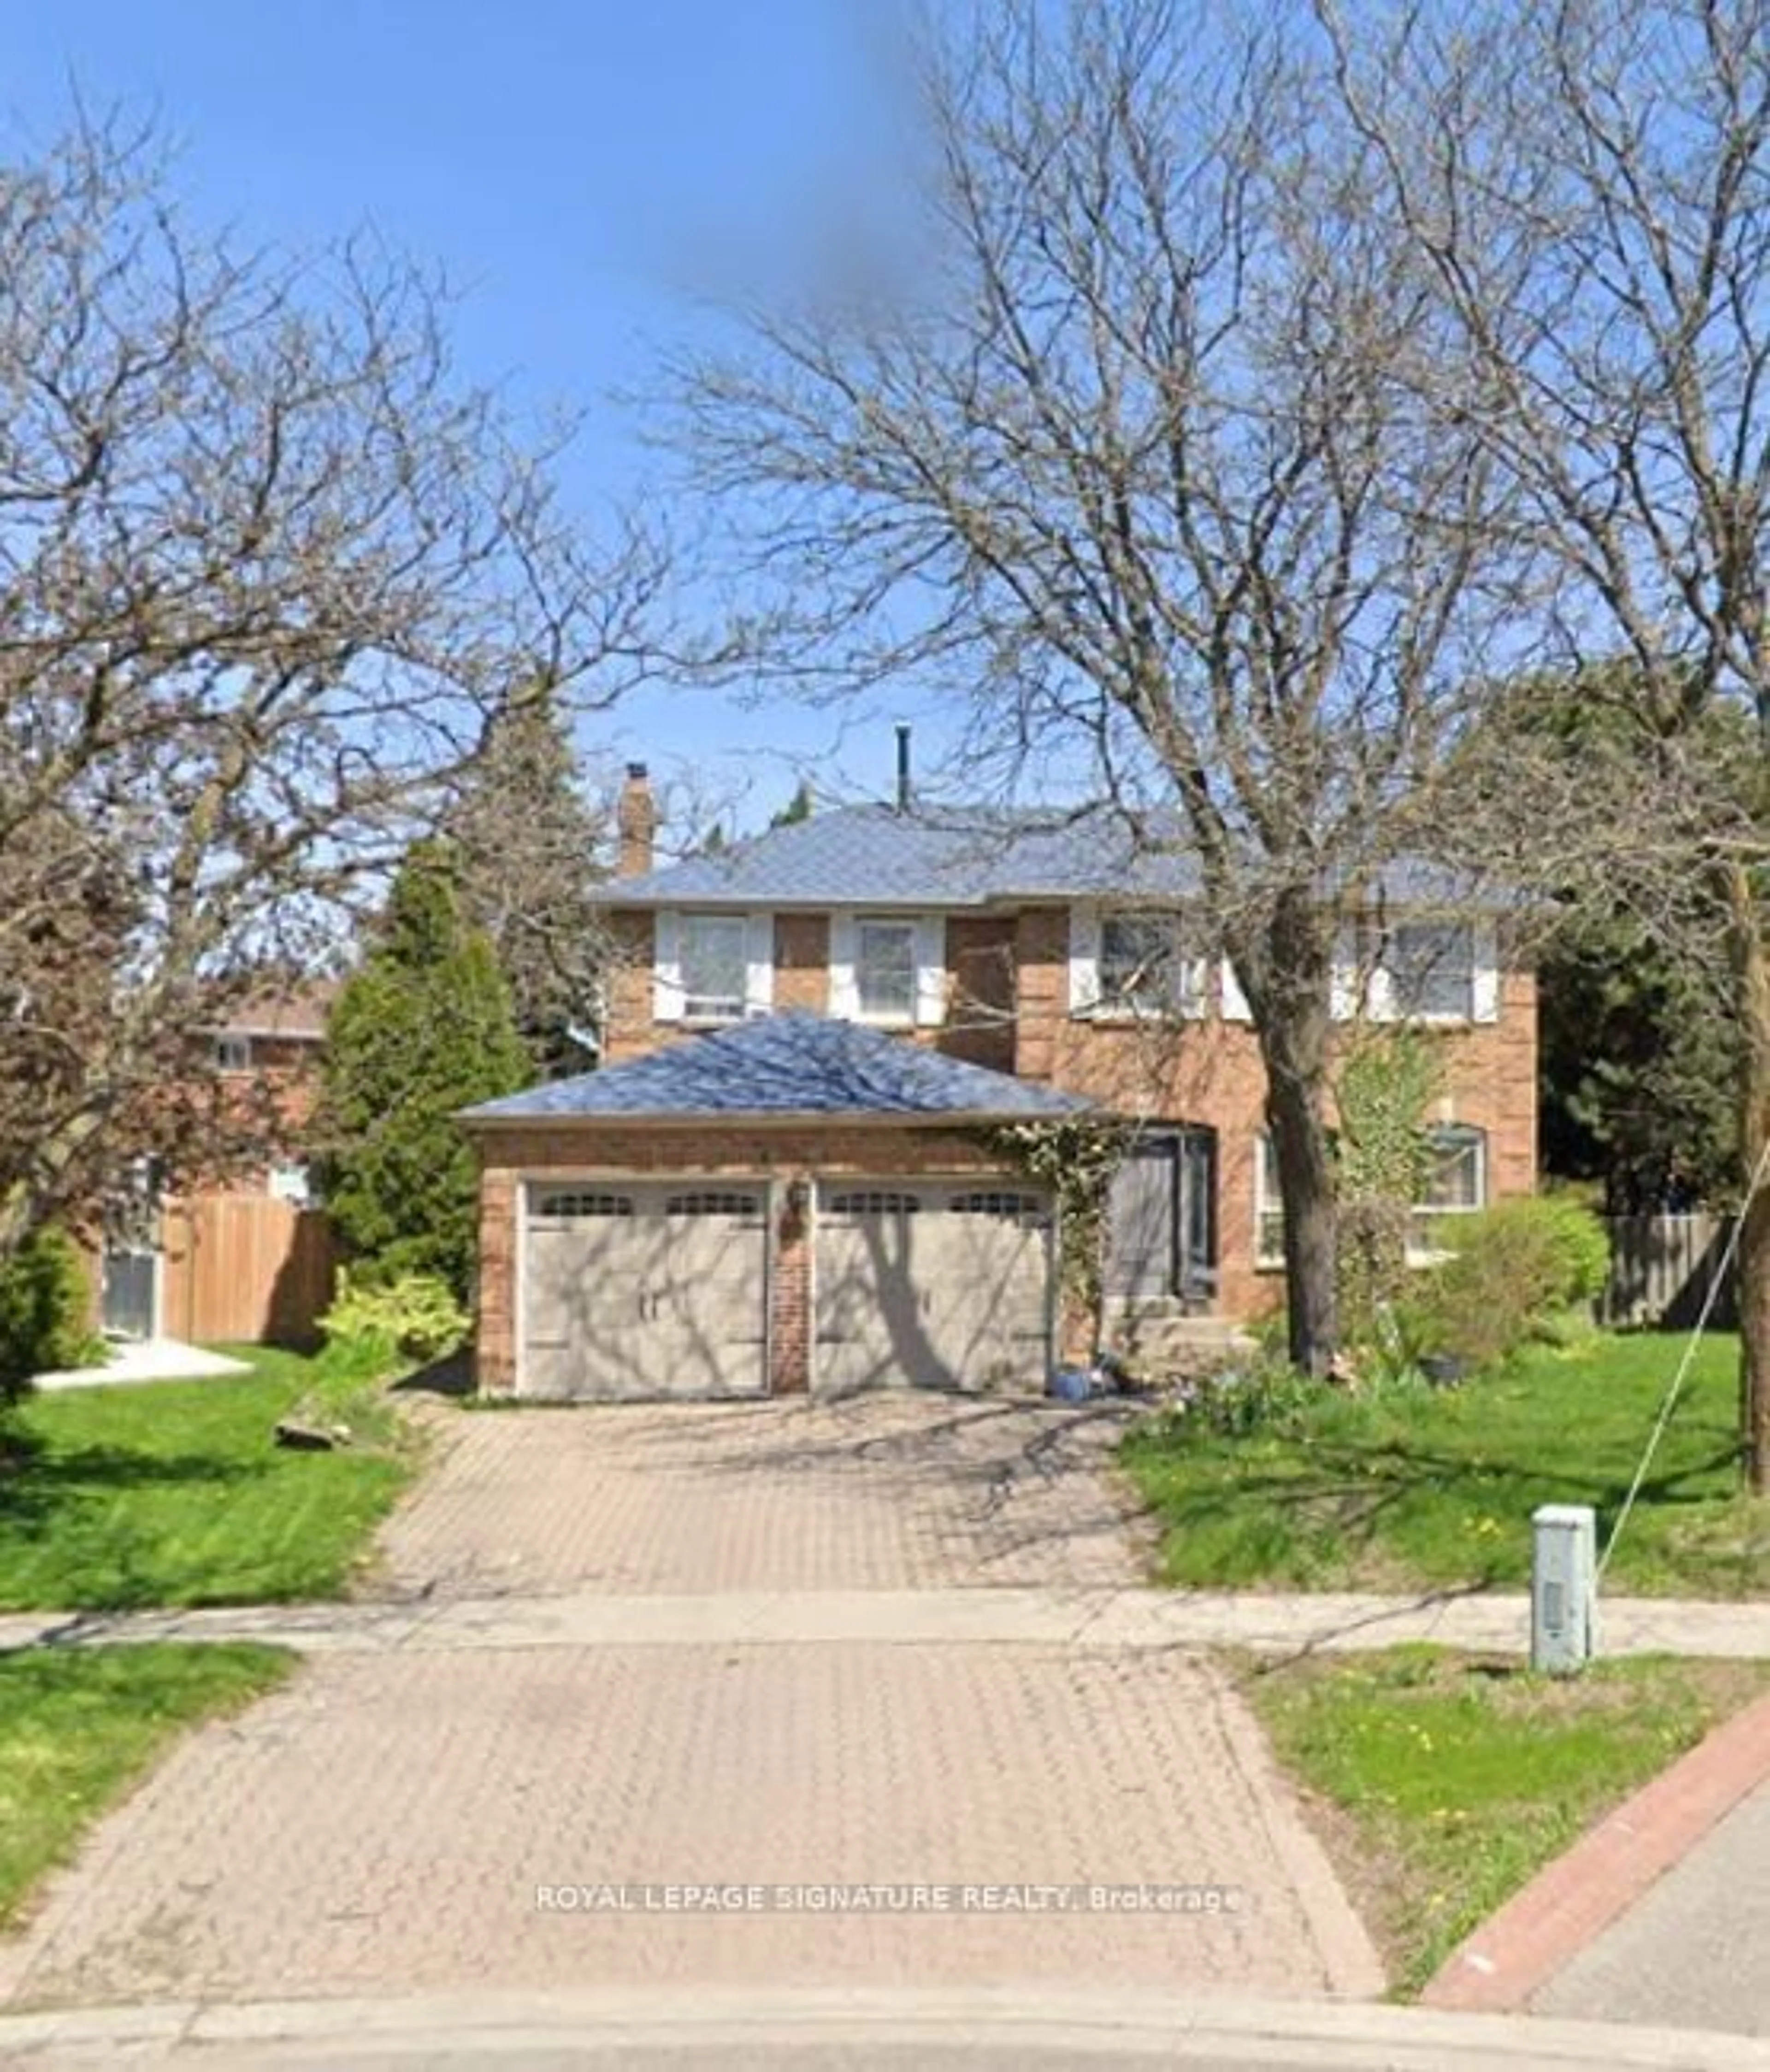 Home with brick exterior material for 22 Nottingham Cres, Brampton Ontario L6S 4G4